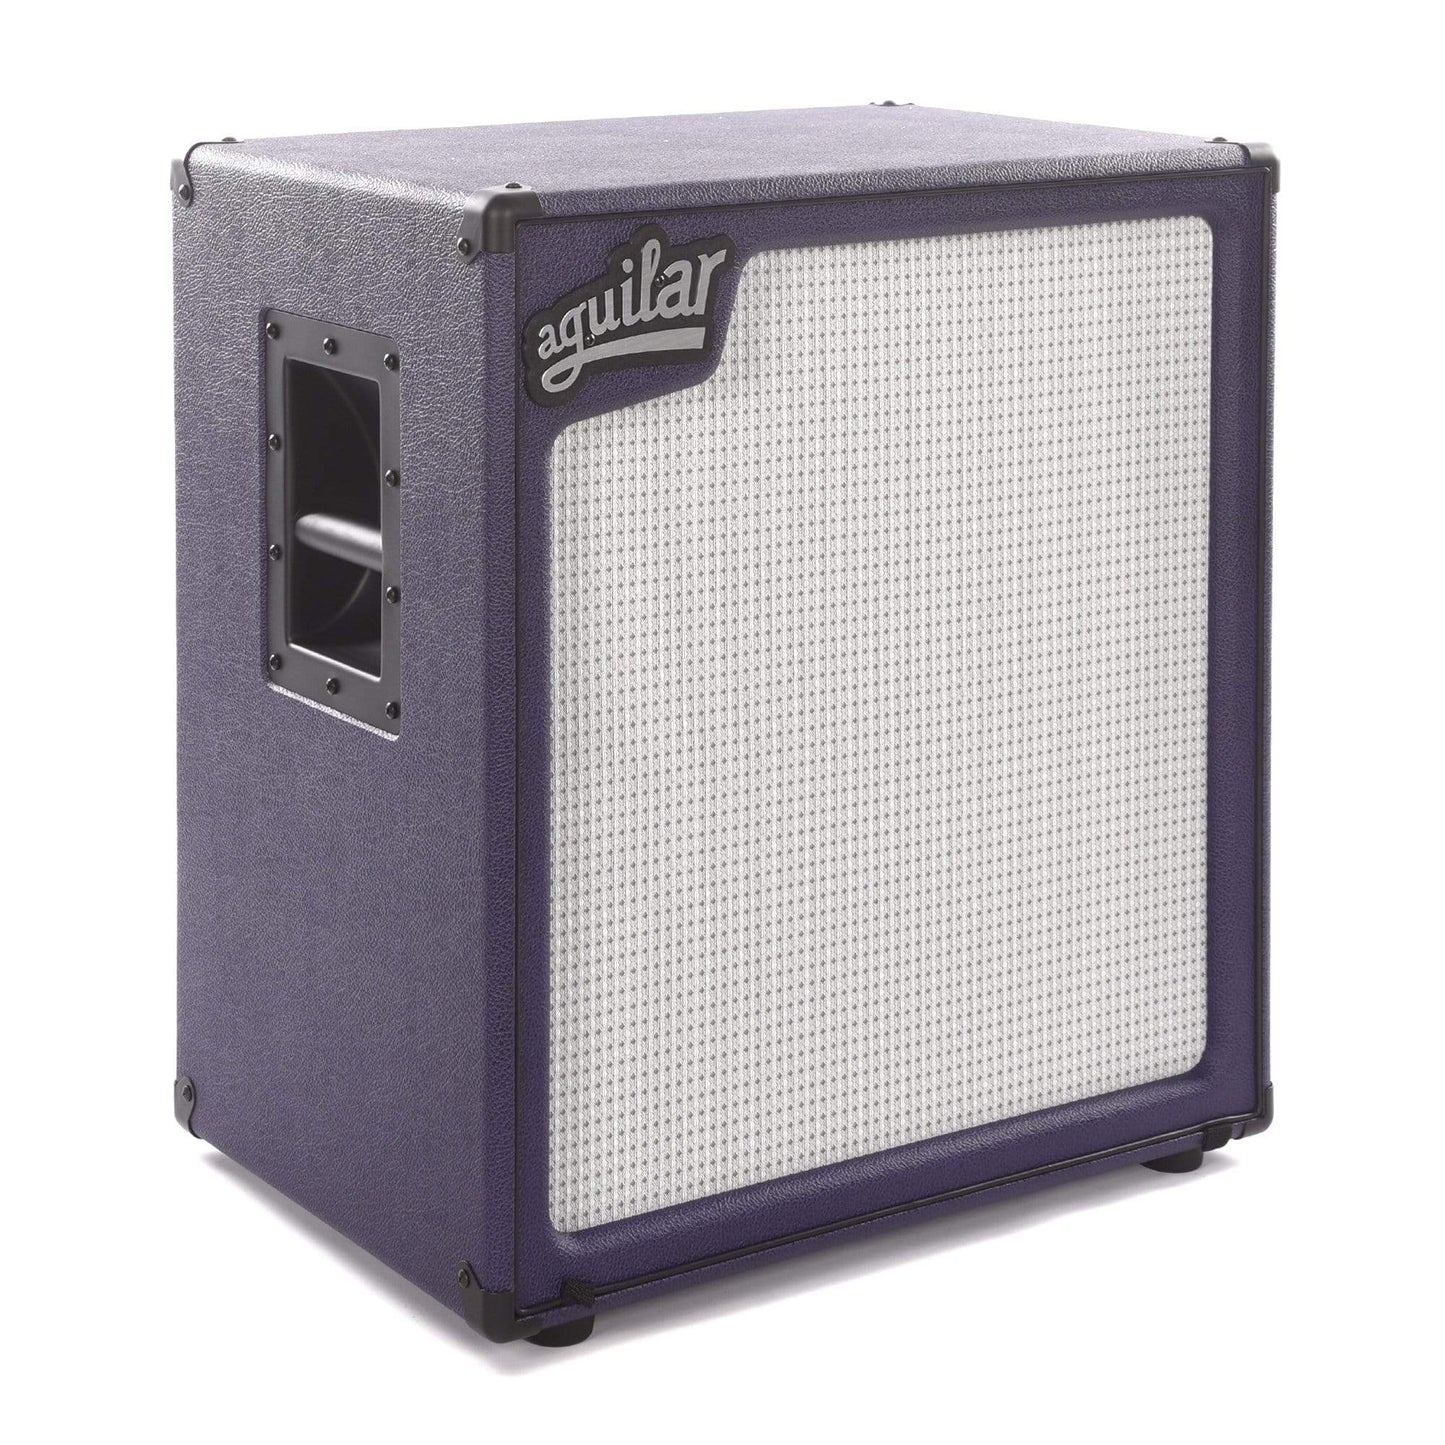 Aguilar Limited Edition SL 410x Super Light Bass Cabinet 4 ohm Royal Purple Amps / Guitar Cabinets